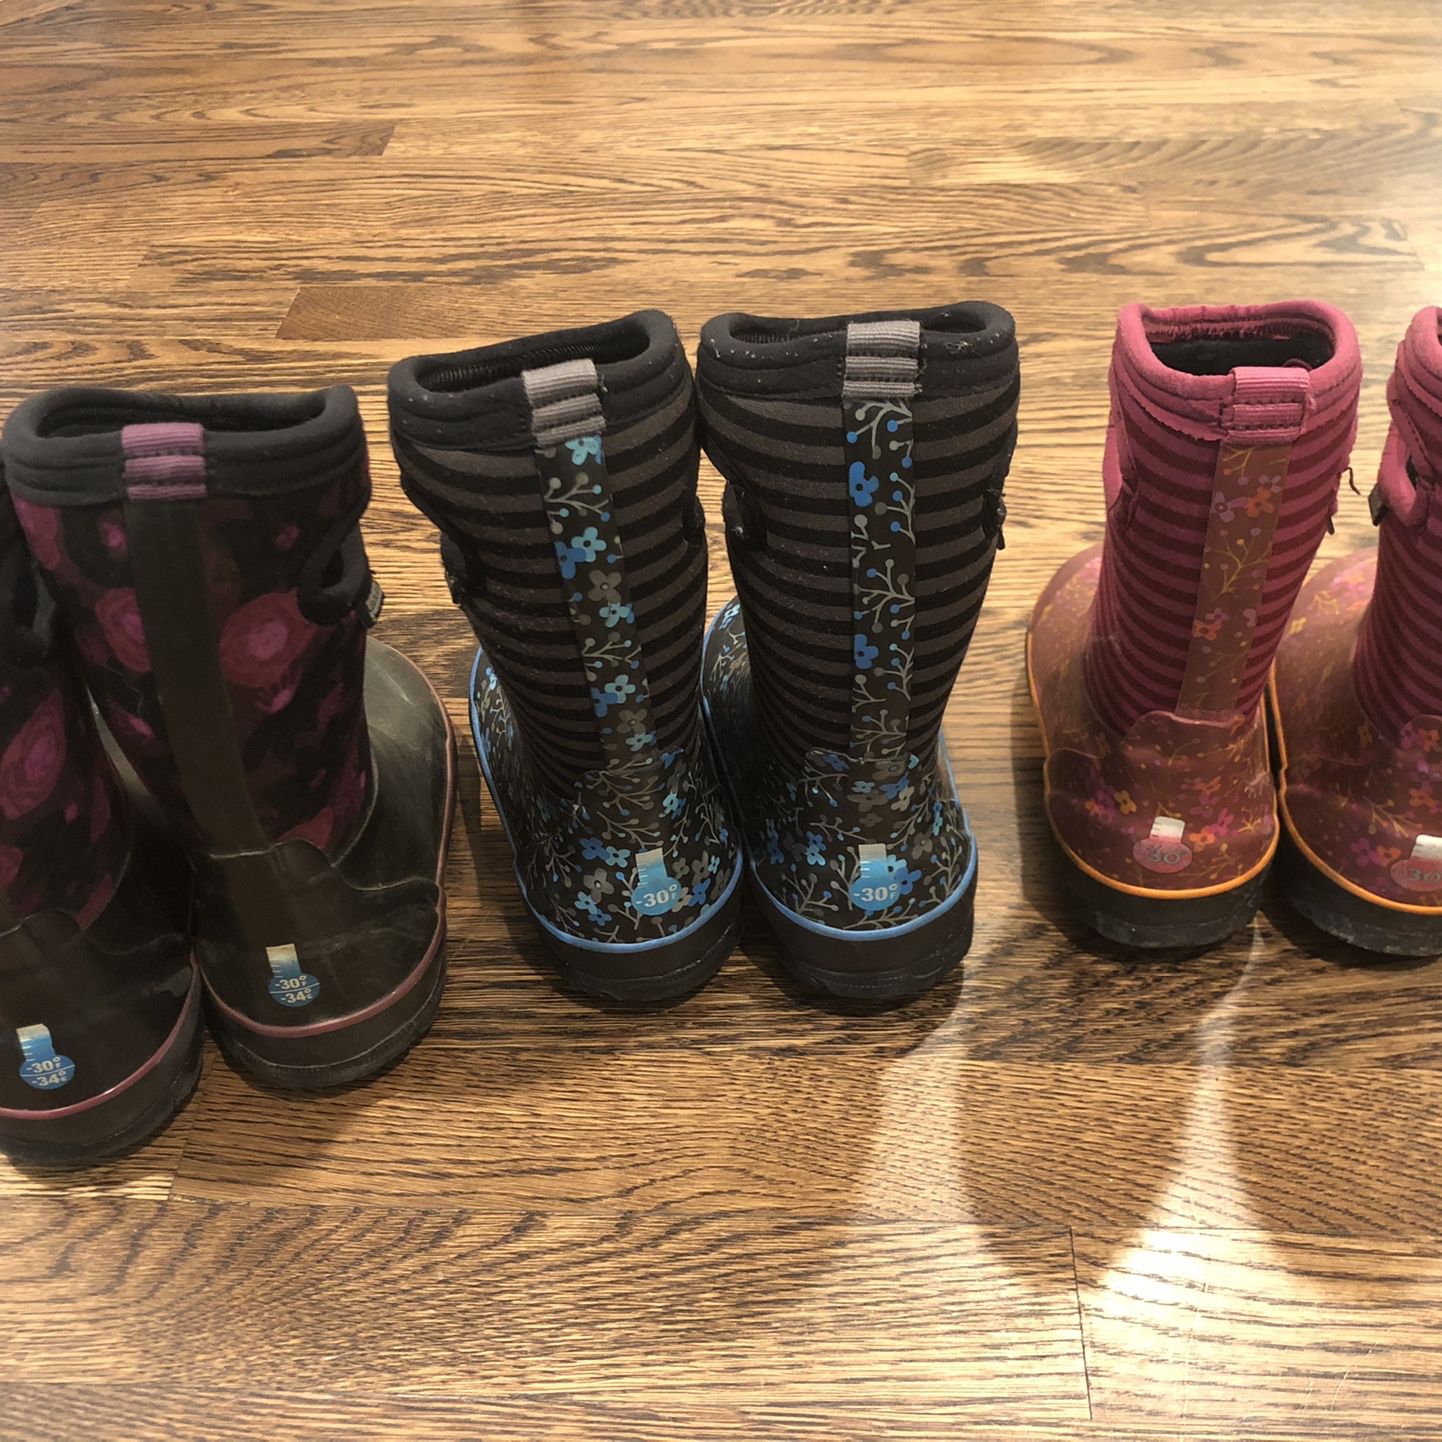 3 Darling Pairs Of Bog Snow/Rain Boots For Kids